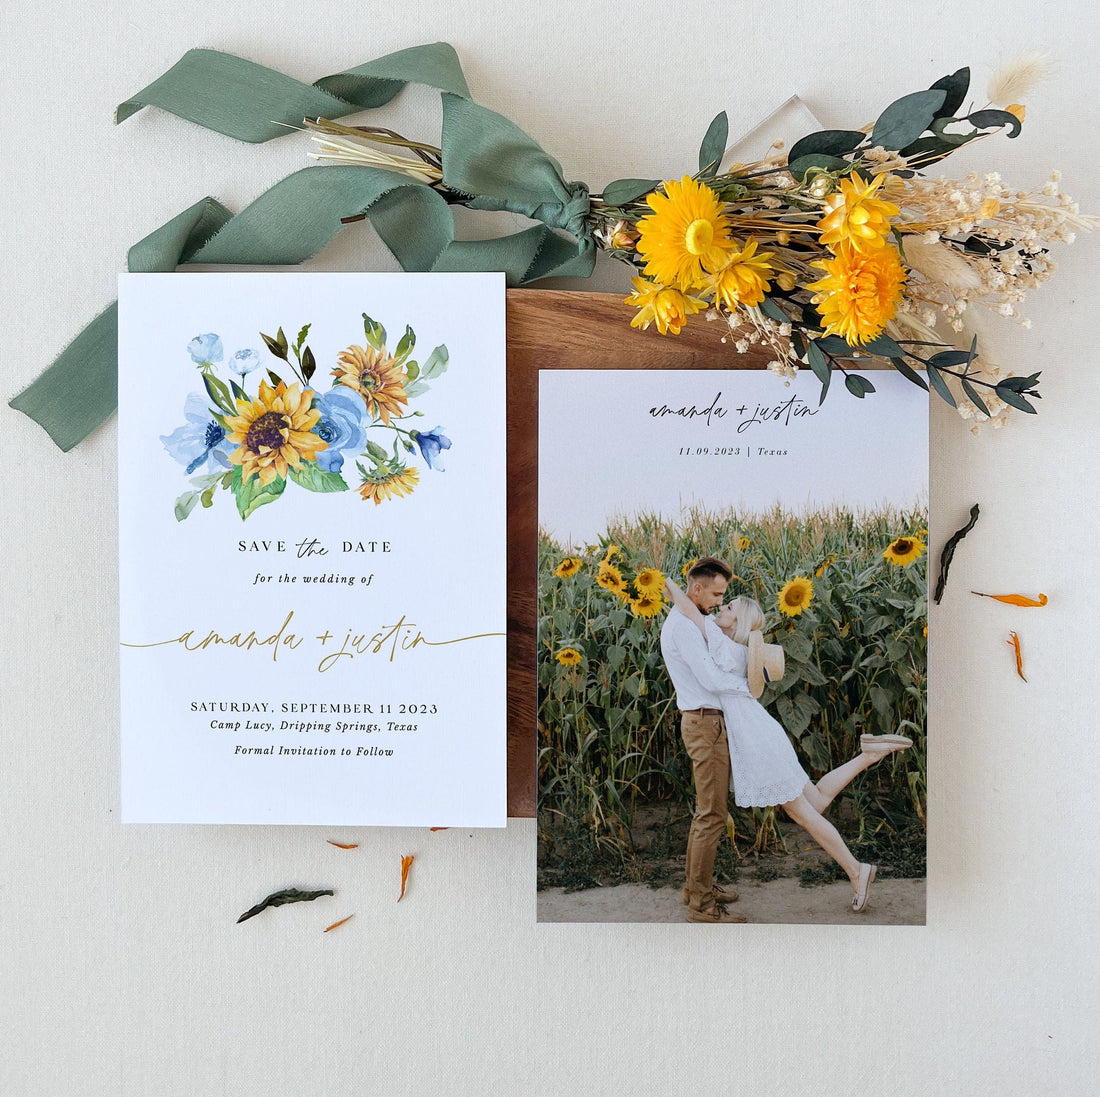 IVY Sunflower and Rose Wedding Save the Date Template